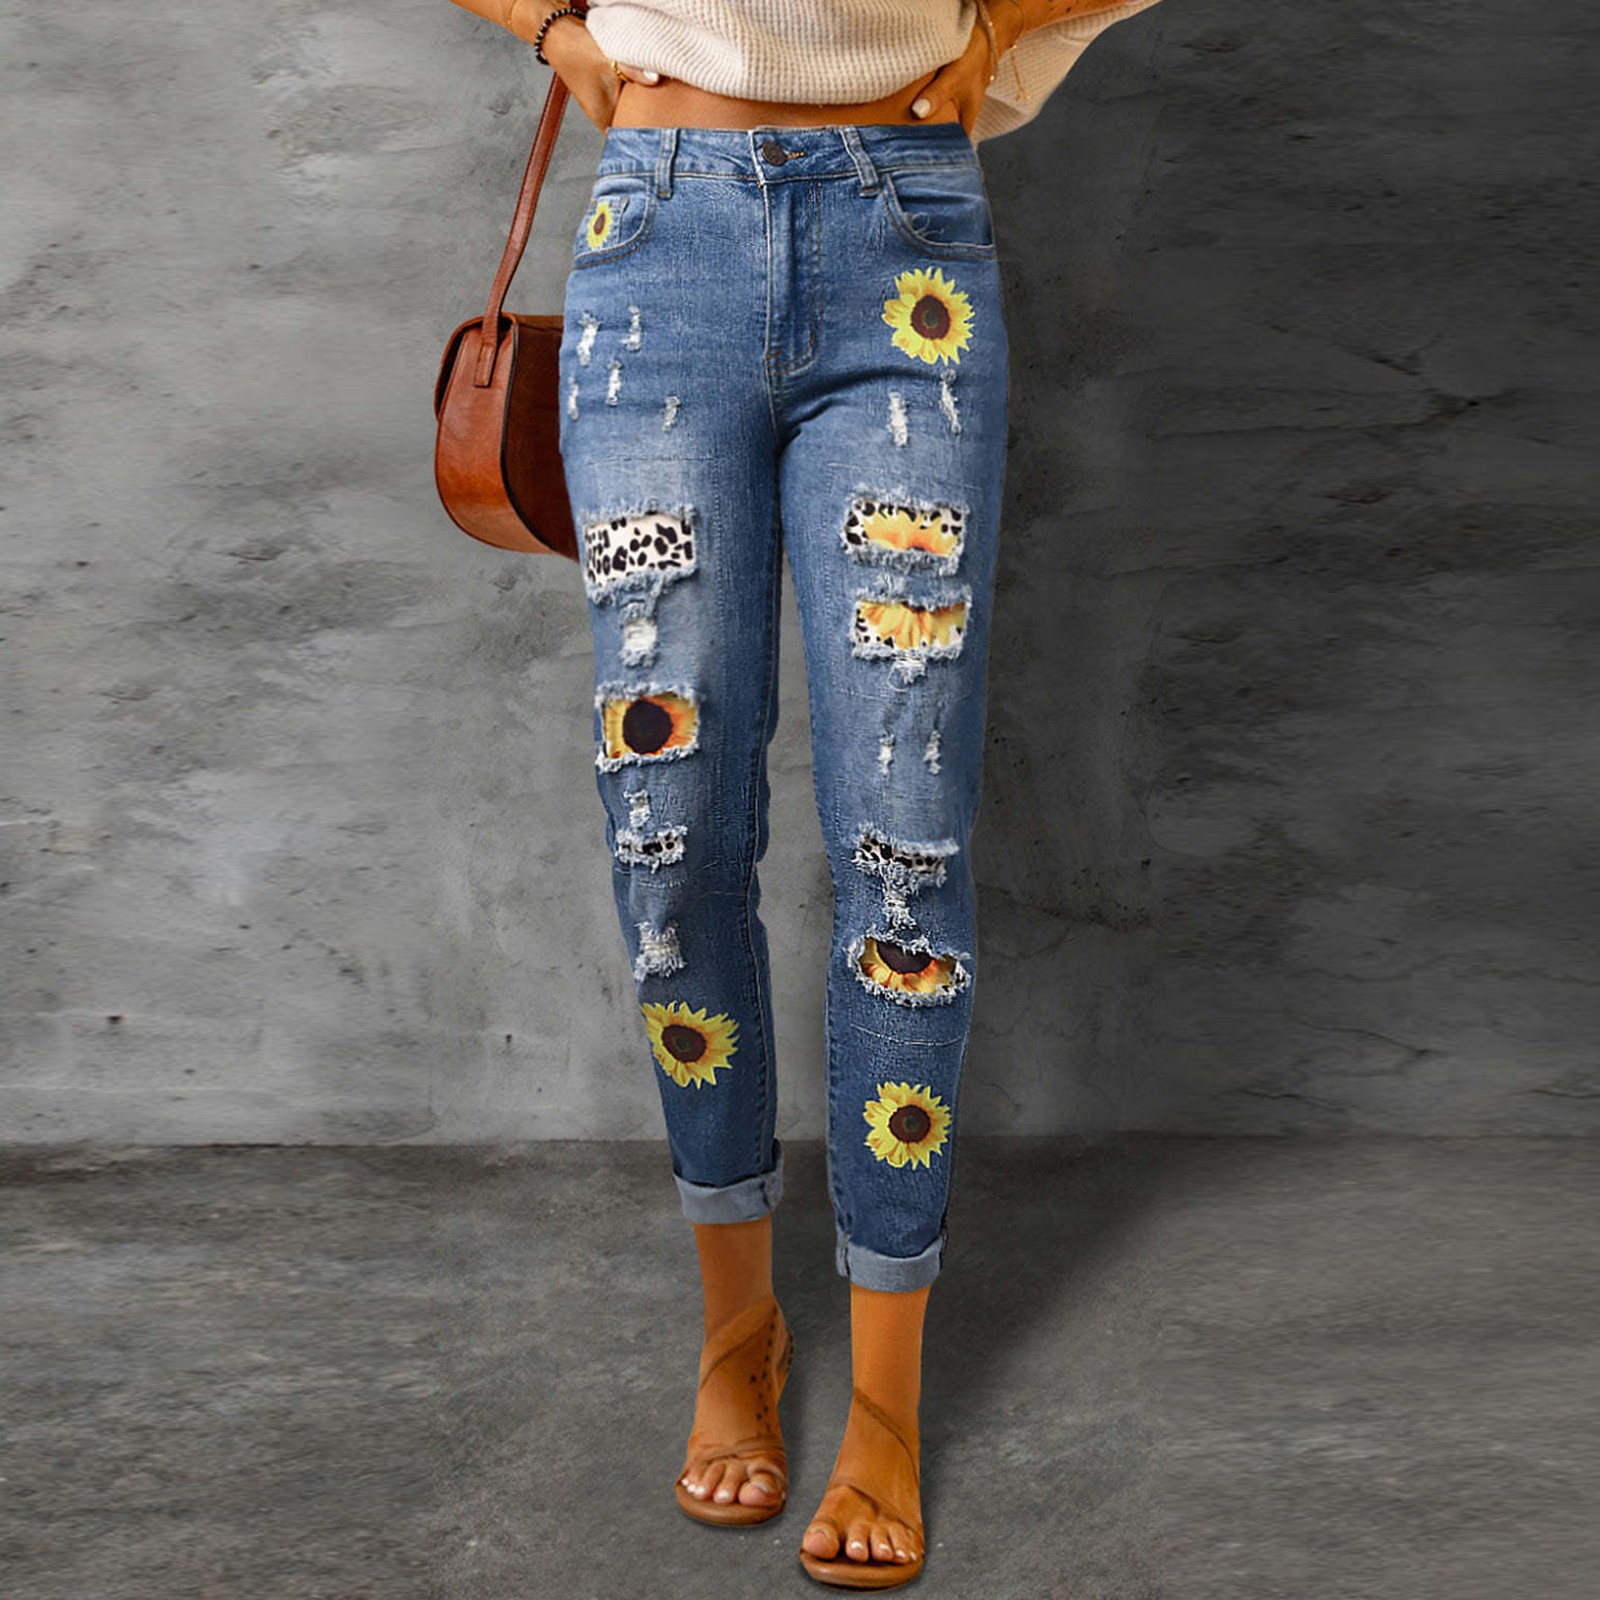 Mlqidk Jeans for Women Stretch Ripped Floral Patchwork Jeans Destroyed Slim  Fit Denim Pants,Yellow XXL